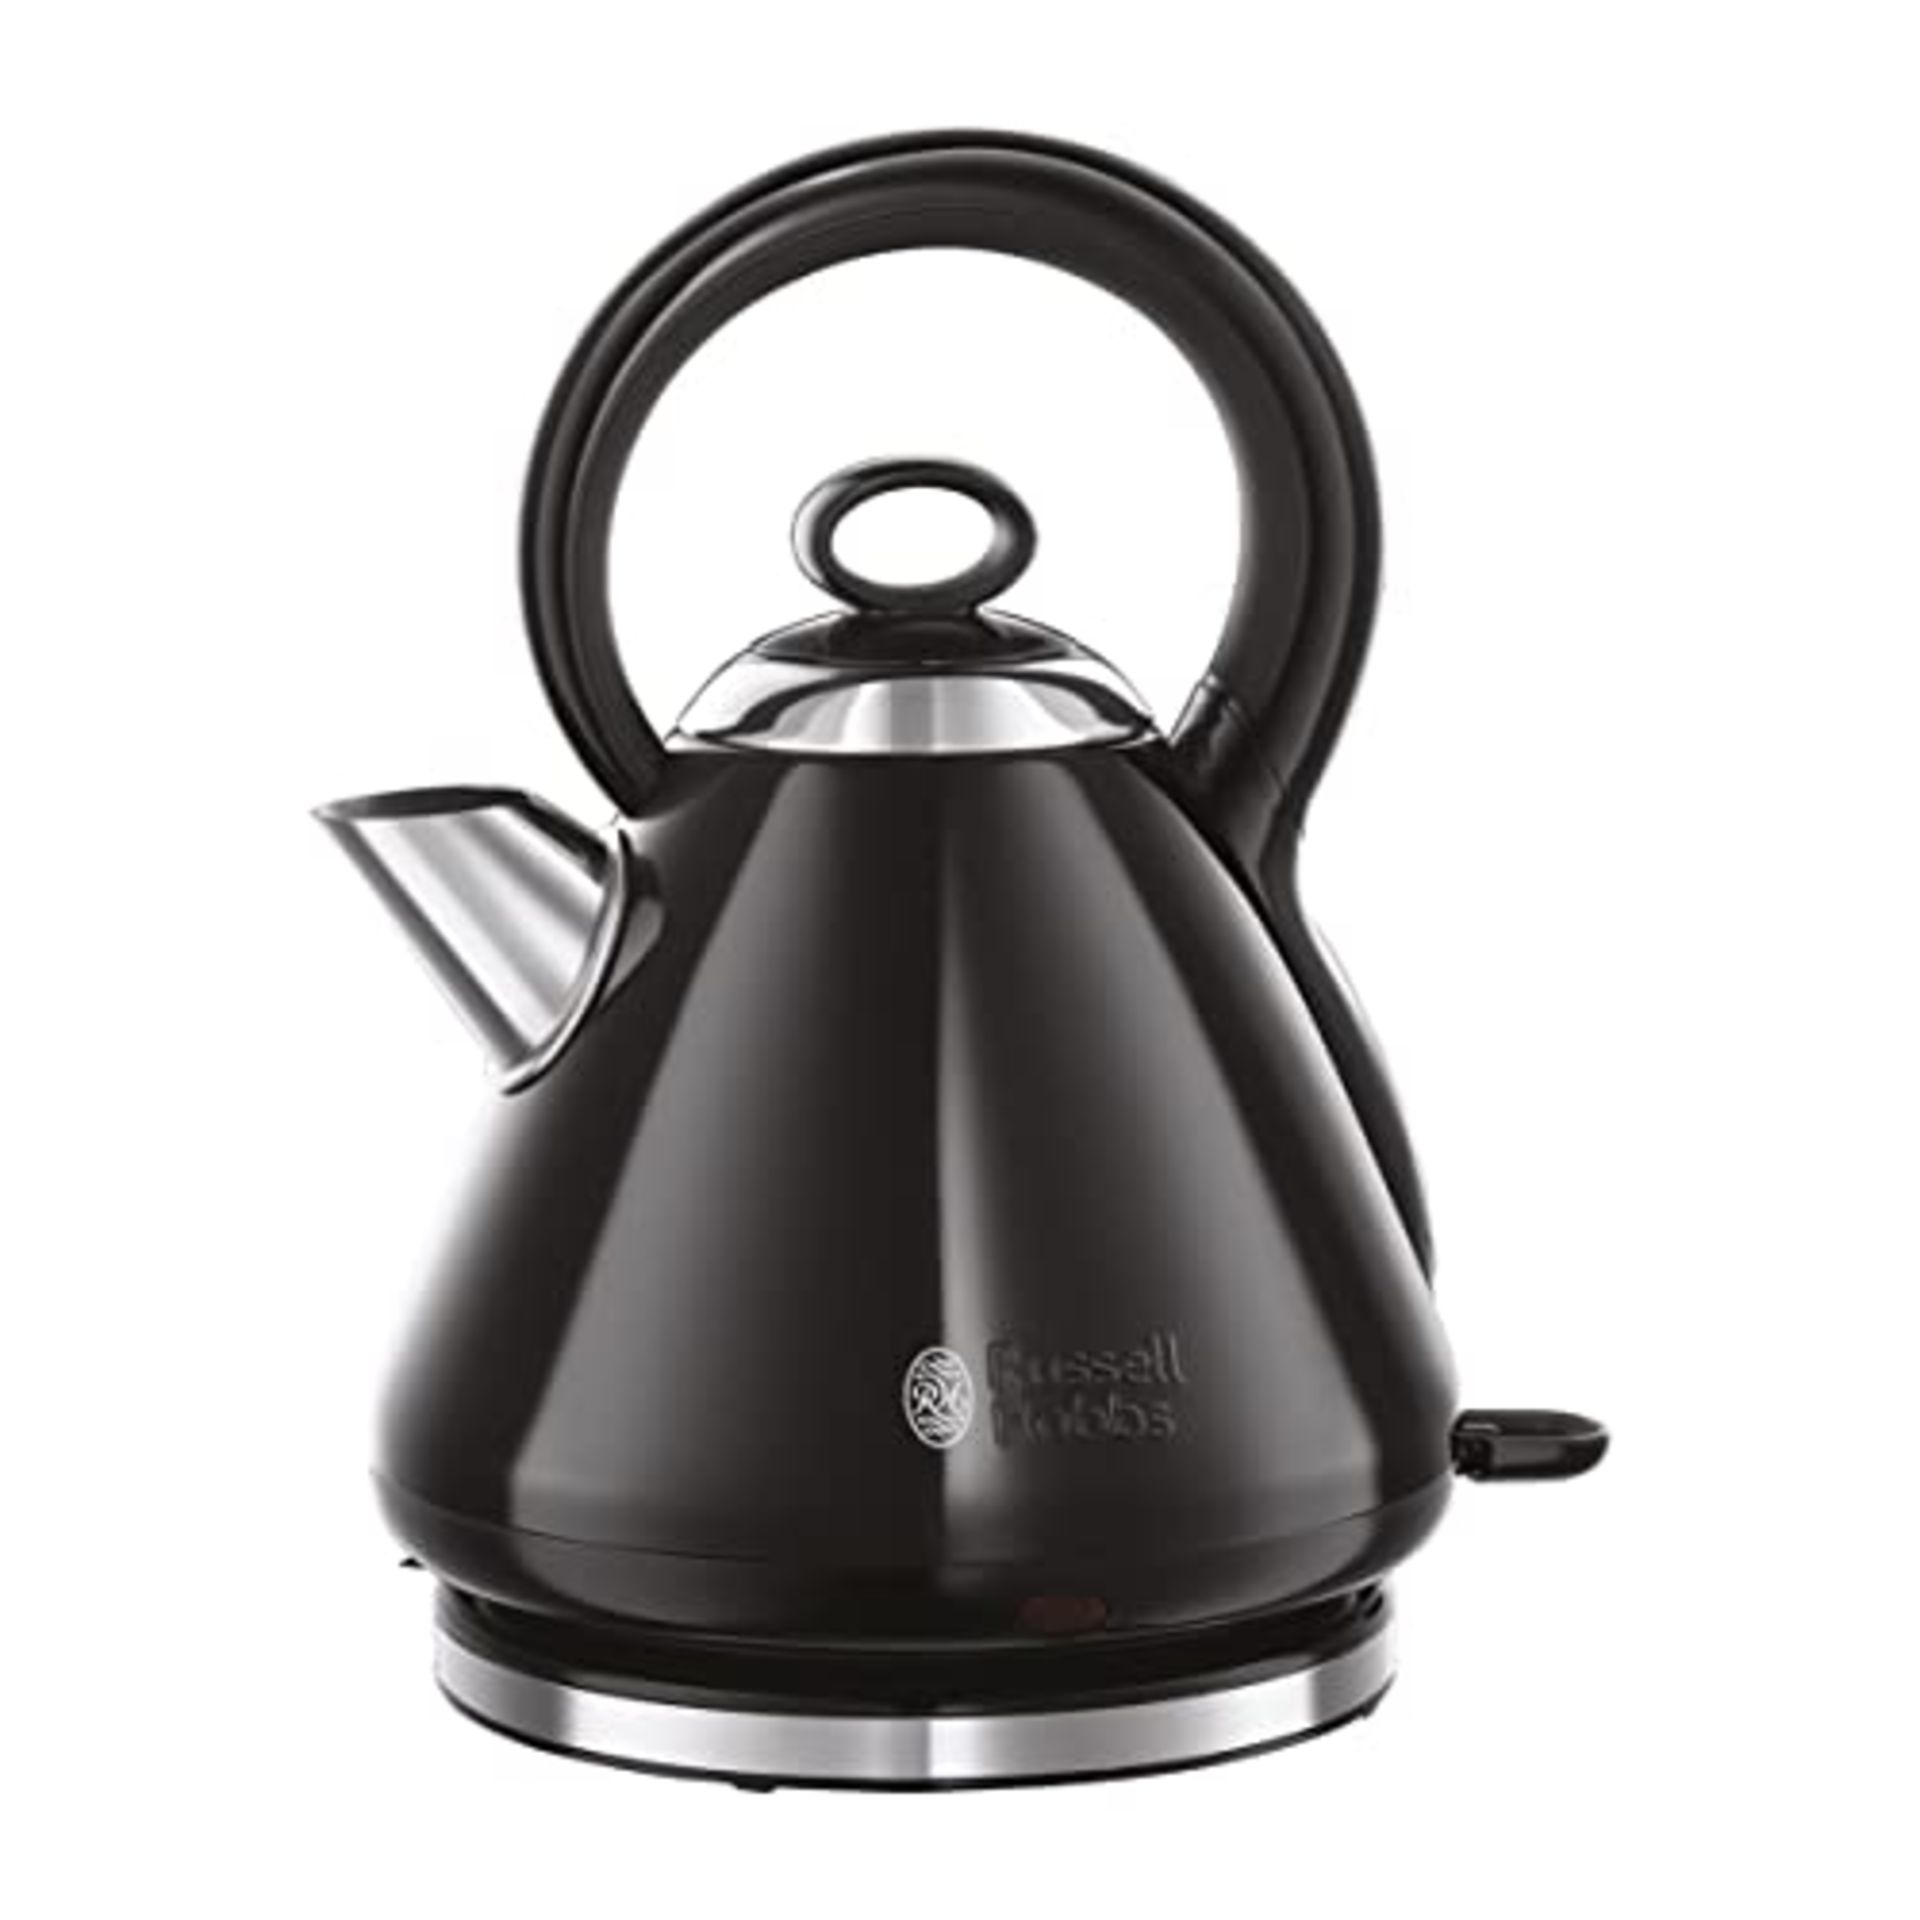 Russell Hobbs 26410 Traditional Electric Kettle - Stainless Steel Fast Boil Kettle, Boils One 235...